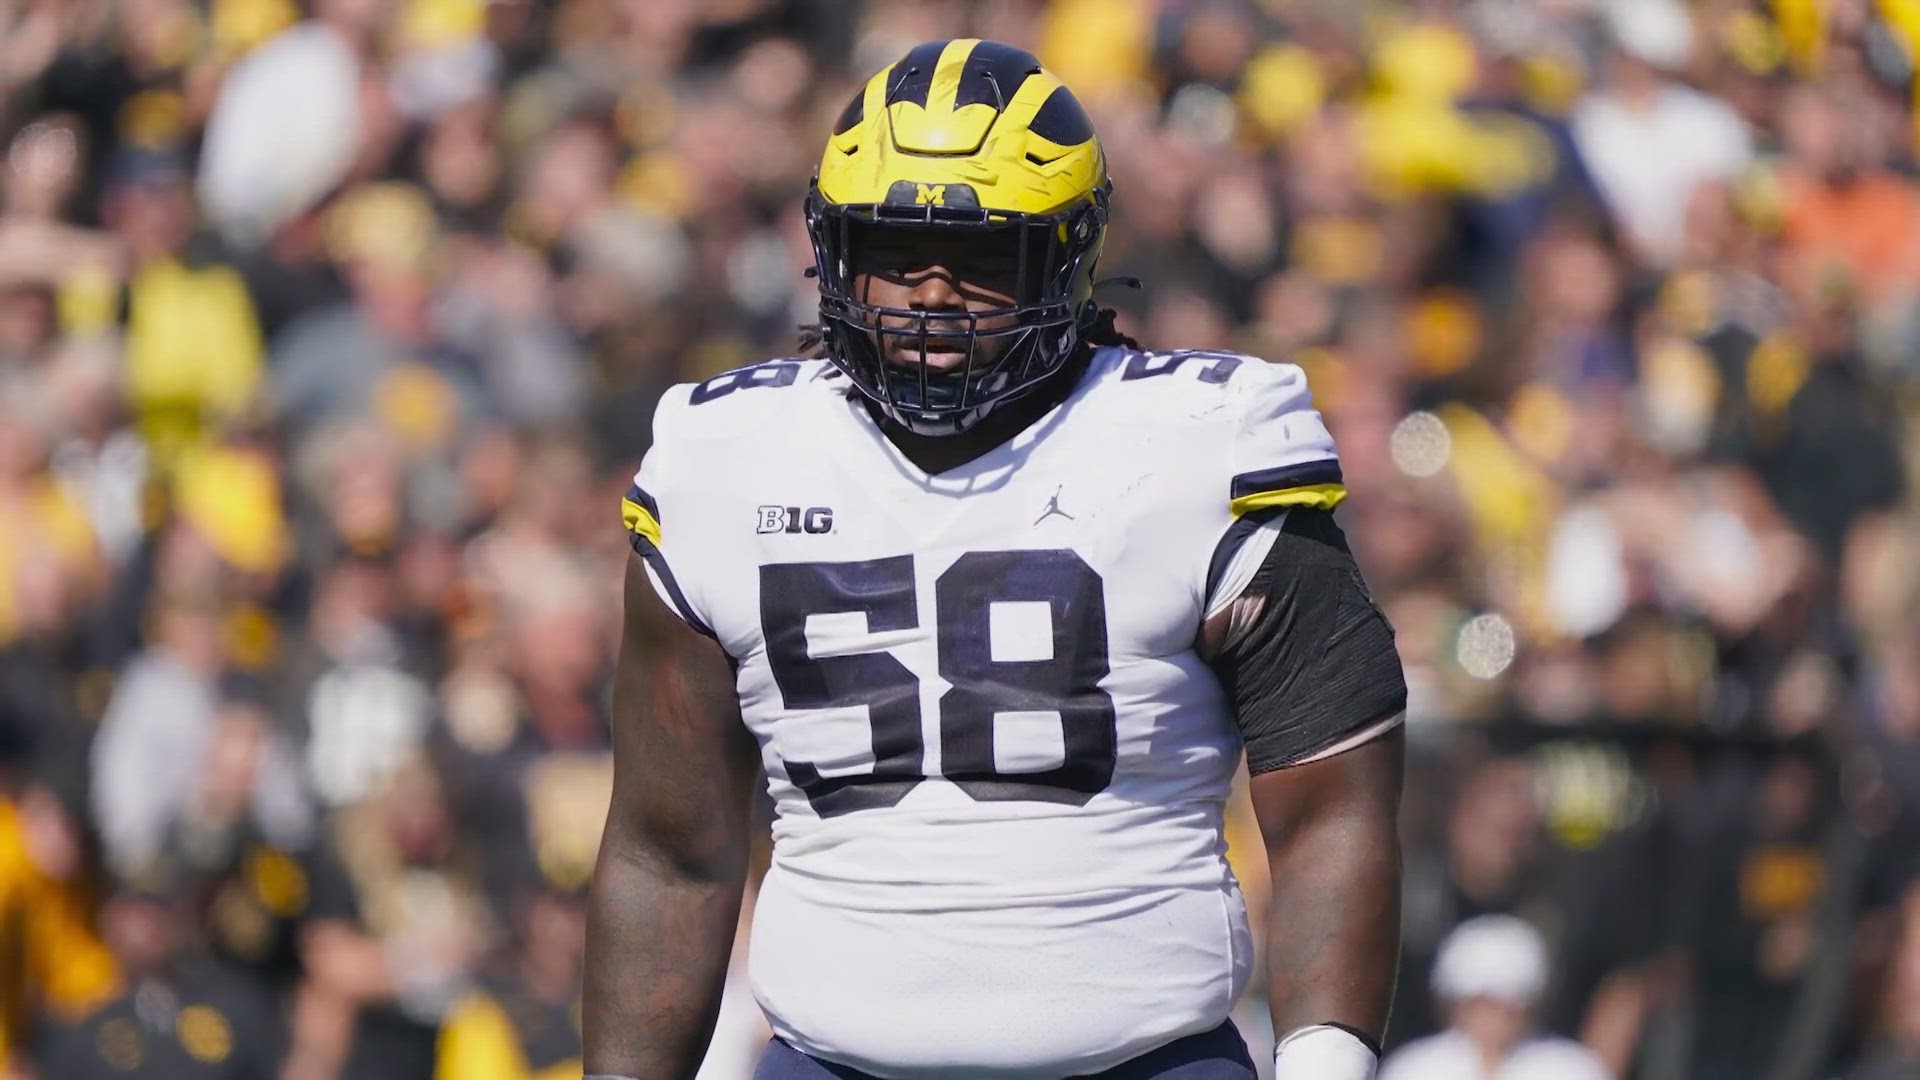 The 6-foot-3, 323-pound defensive tackle out of Michigan will look to bolster a Cowboys defense that at times struggled against the run last season.